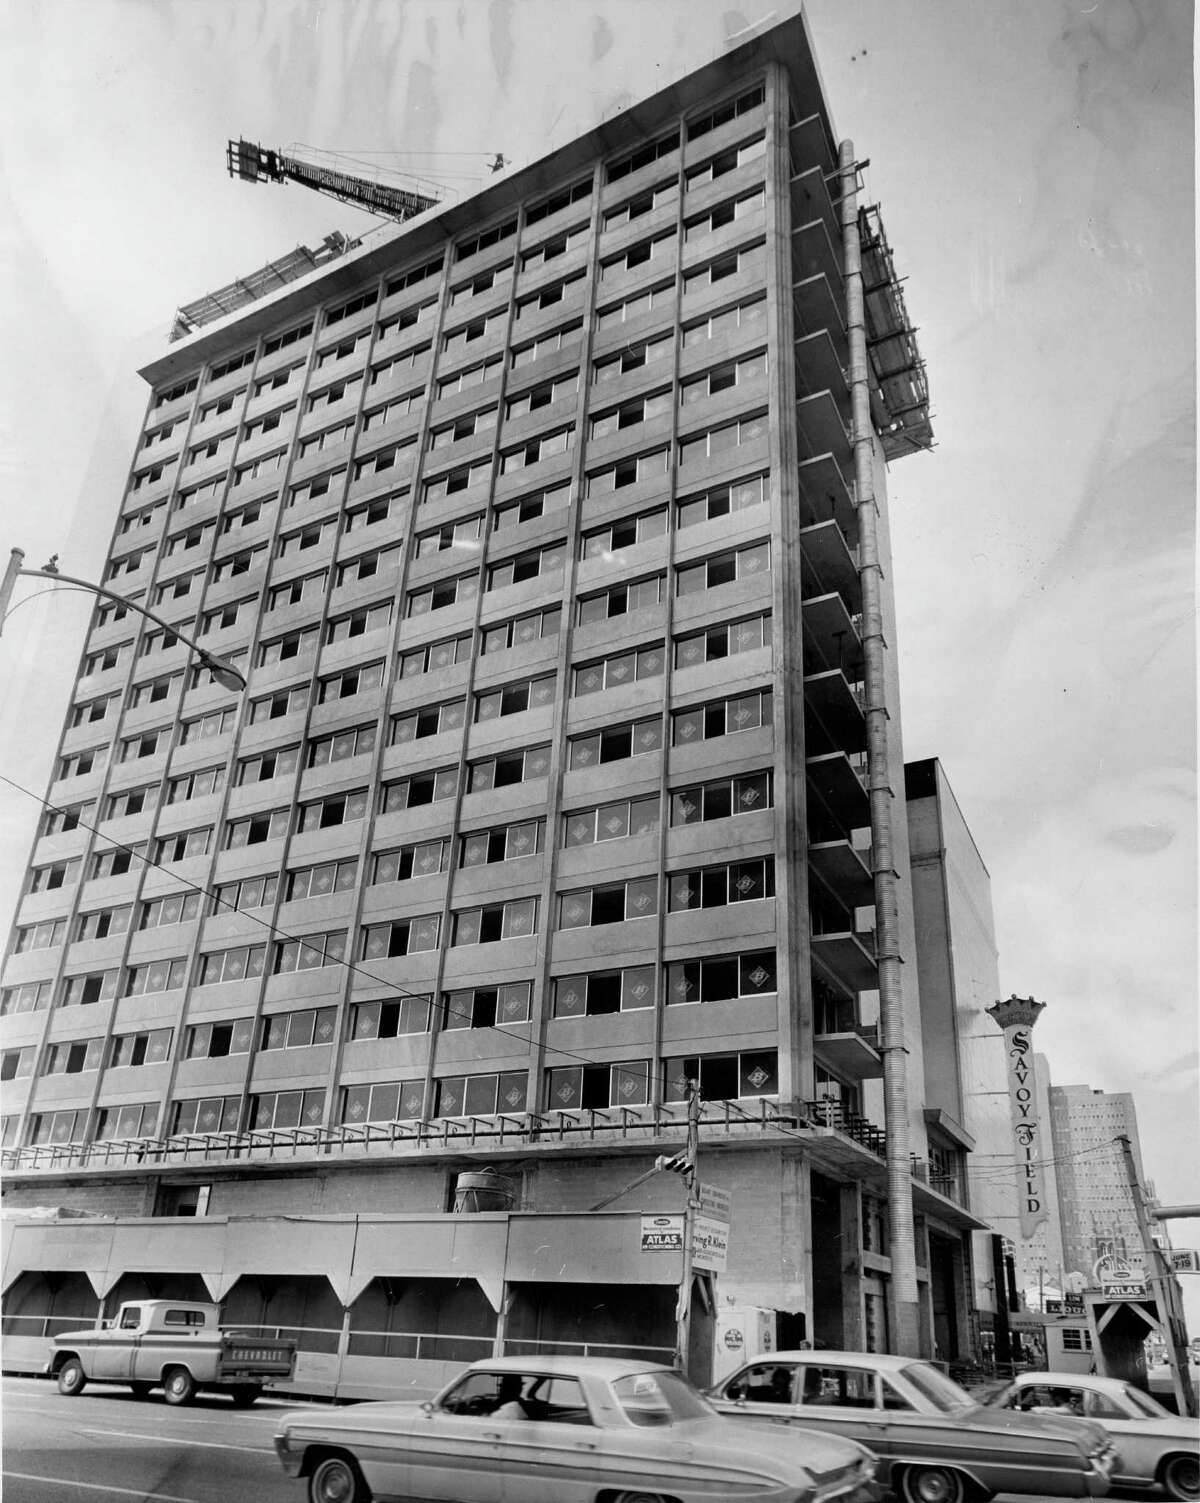 The 17-story addition to the Savoy Hotel, at the corner of Main and Pease, is shown under contruction in 1966.